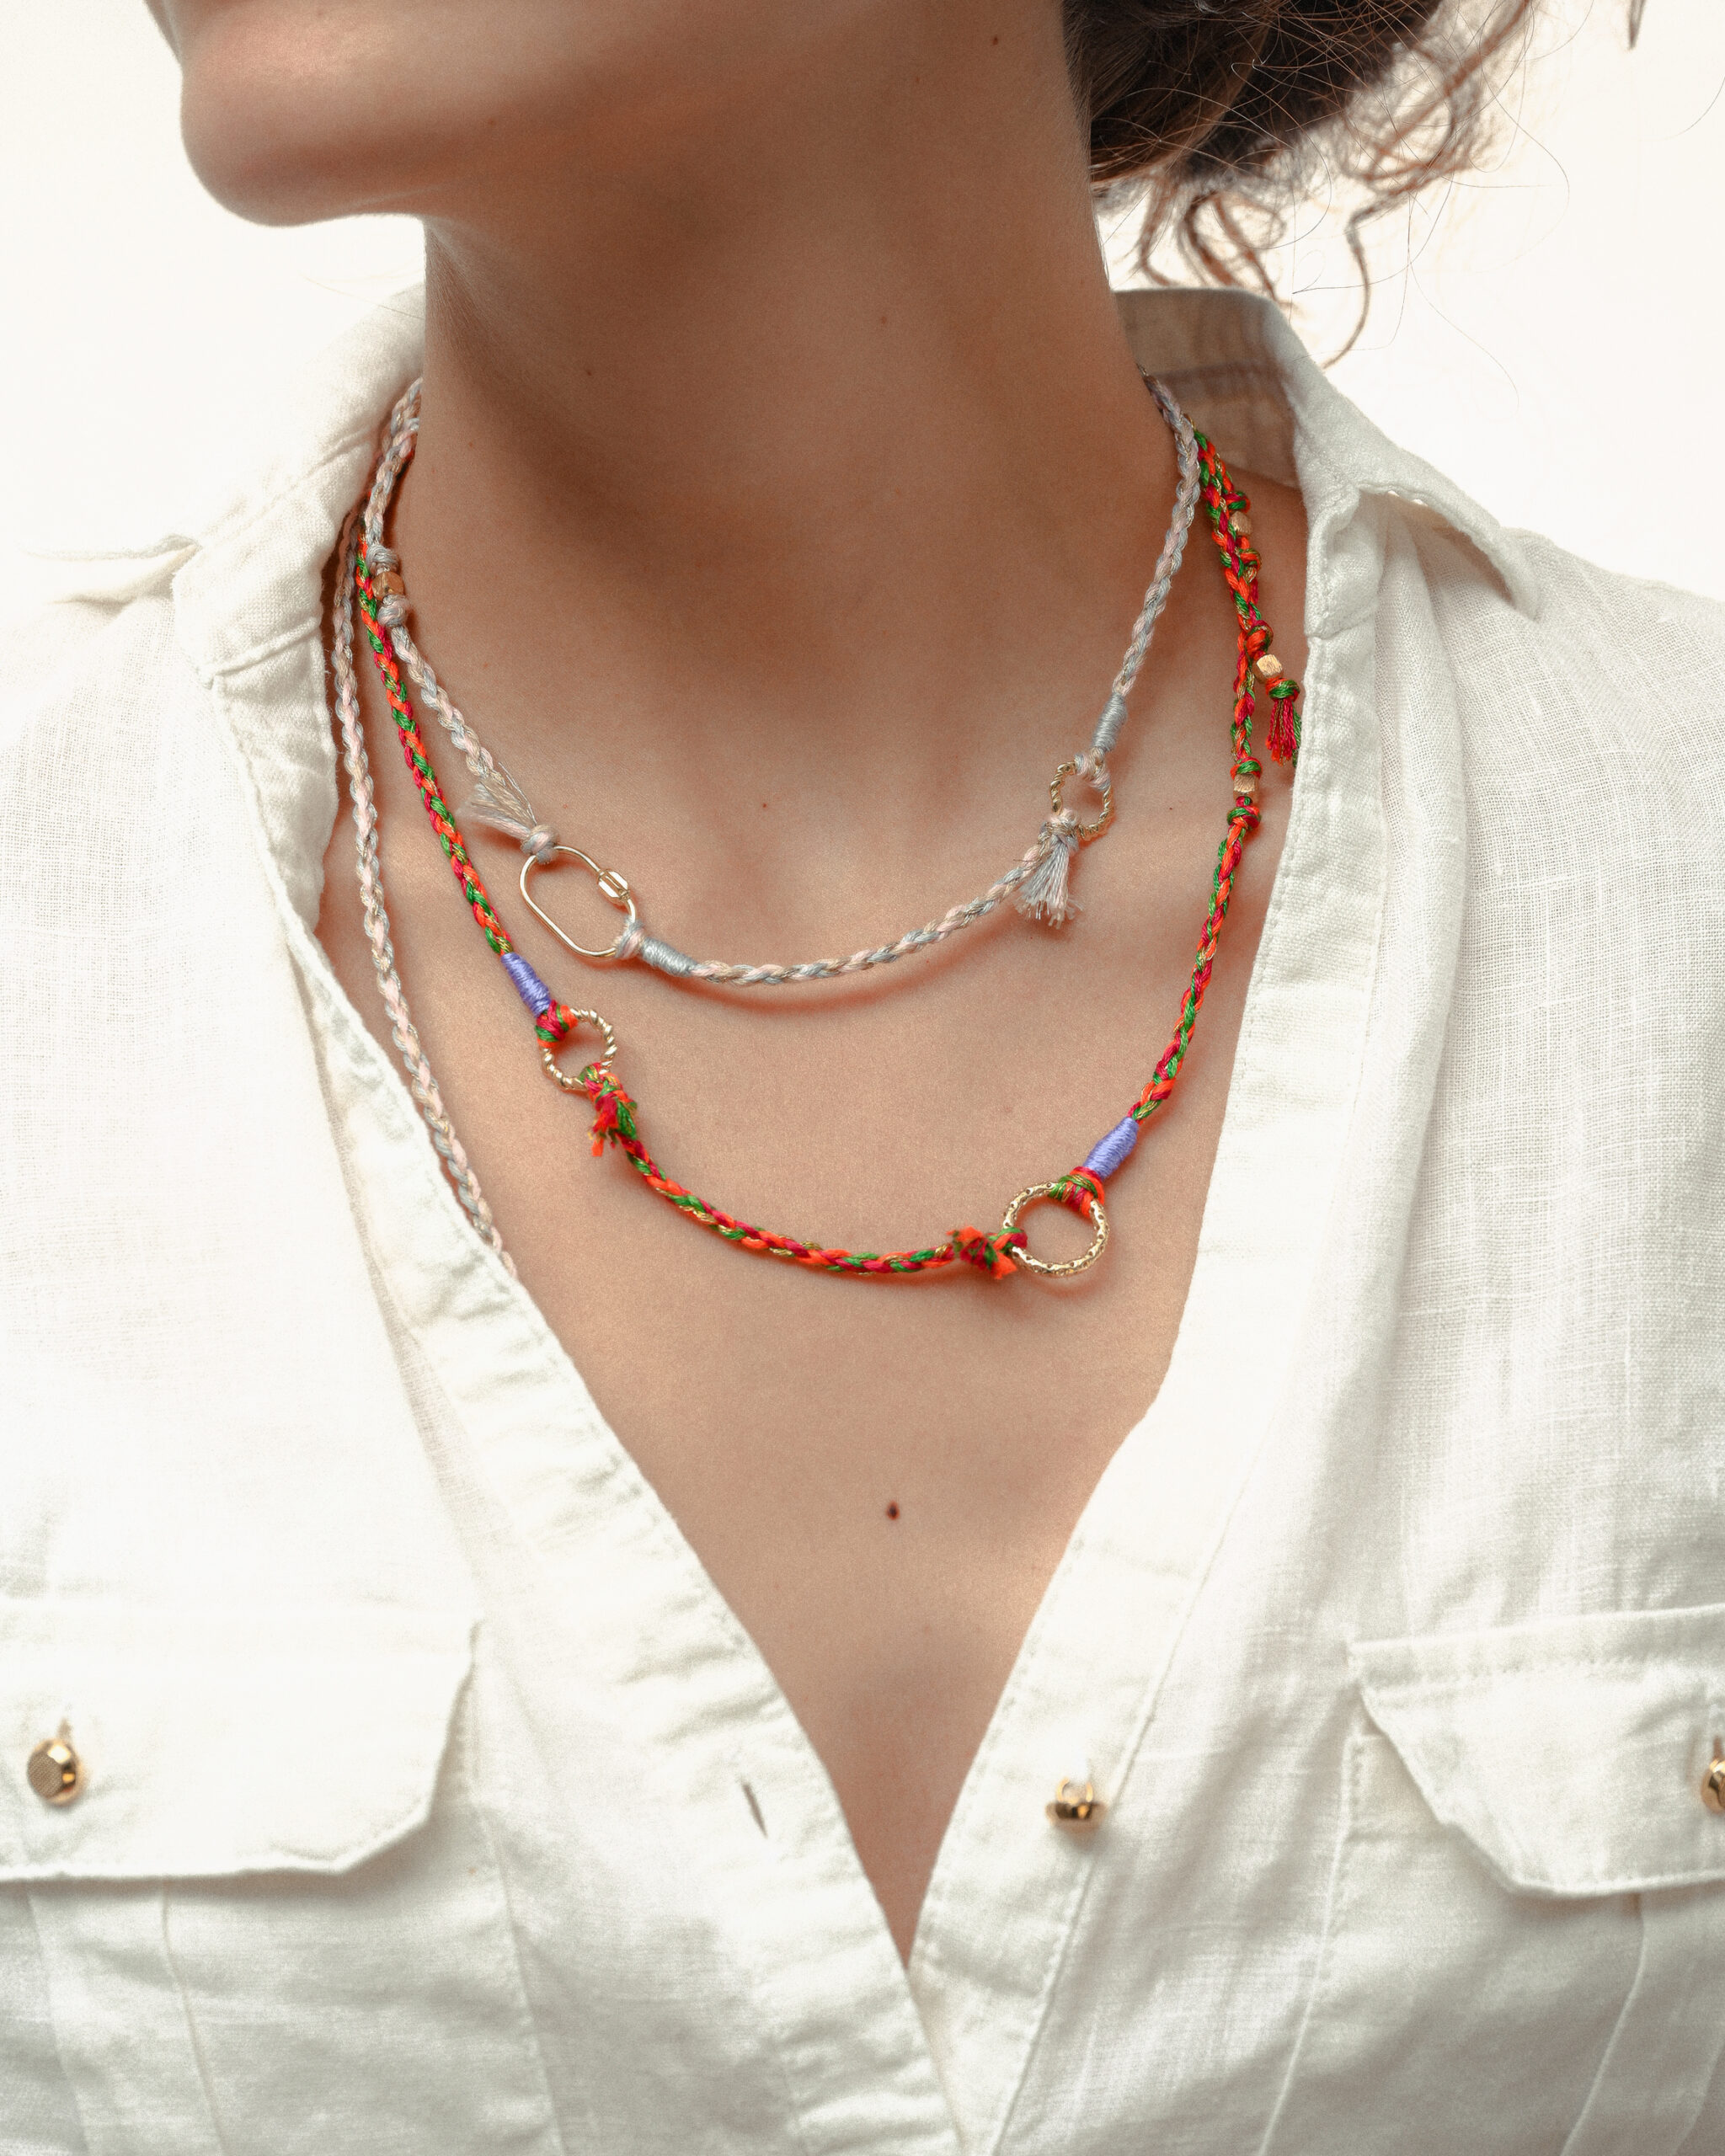 Colorful thread necklace